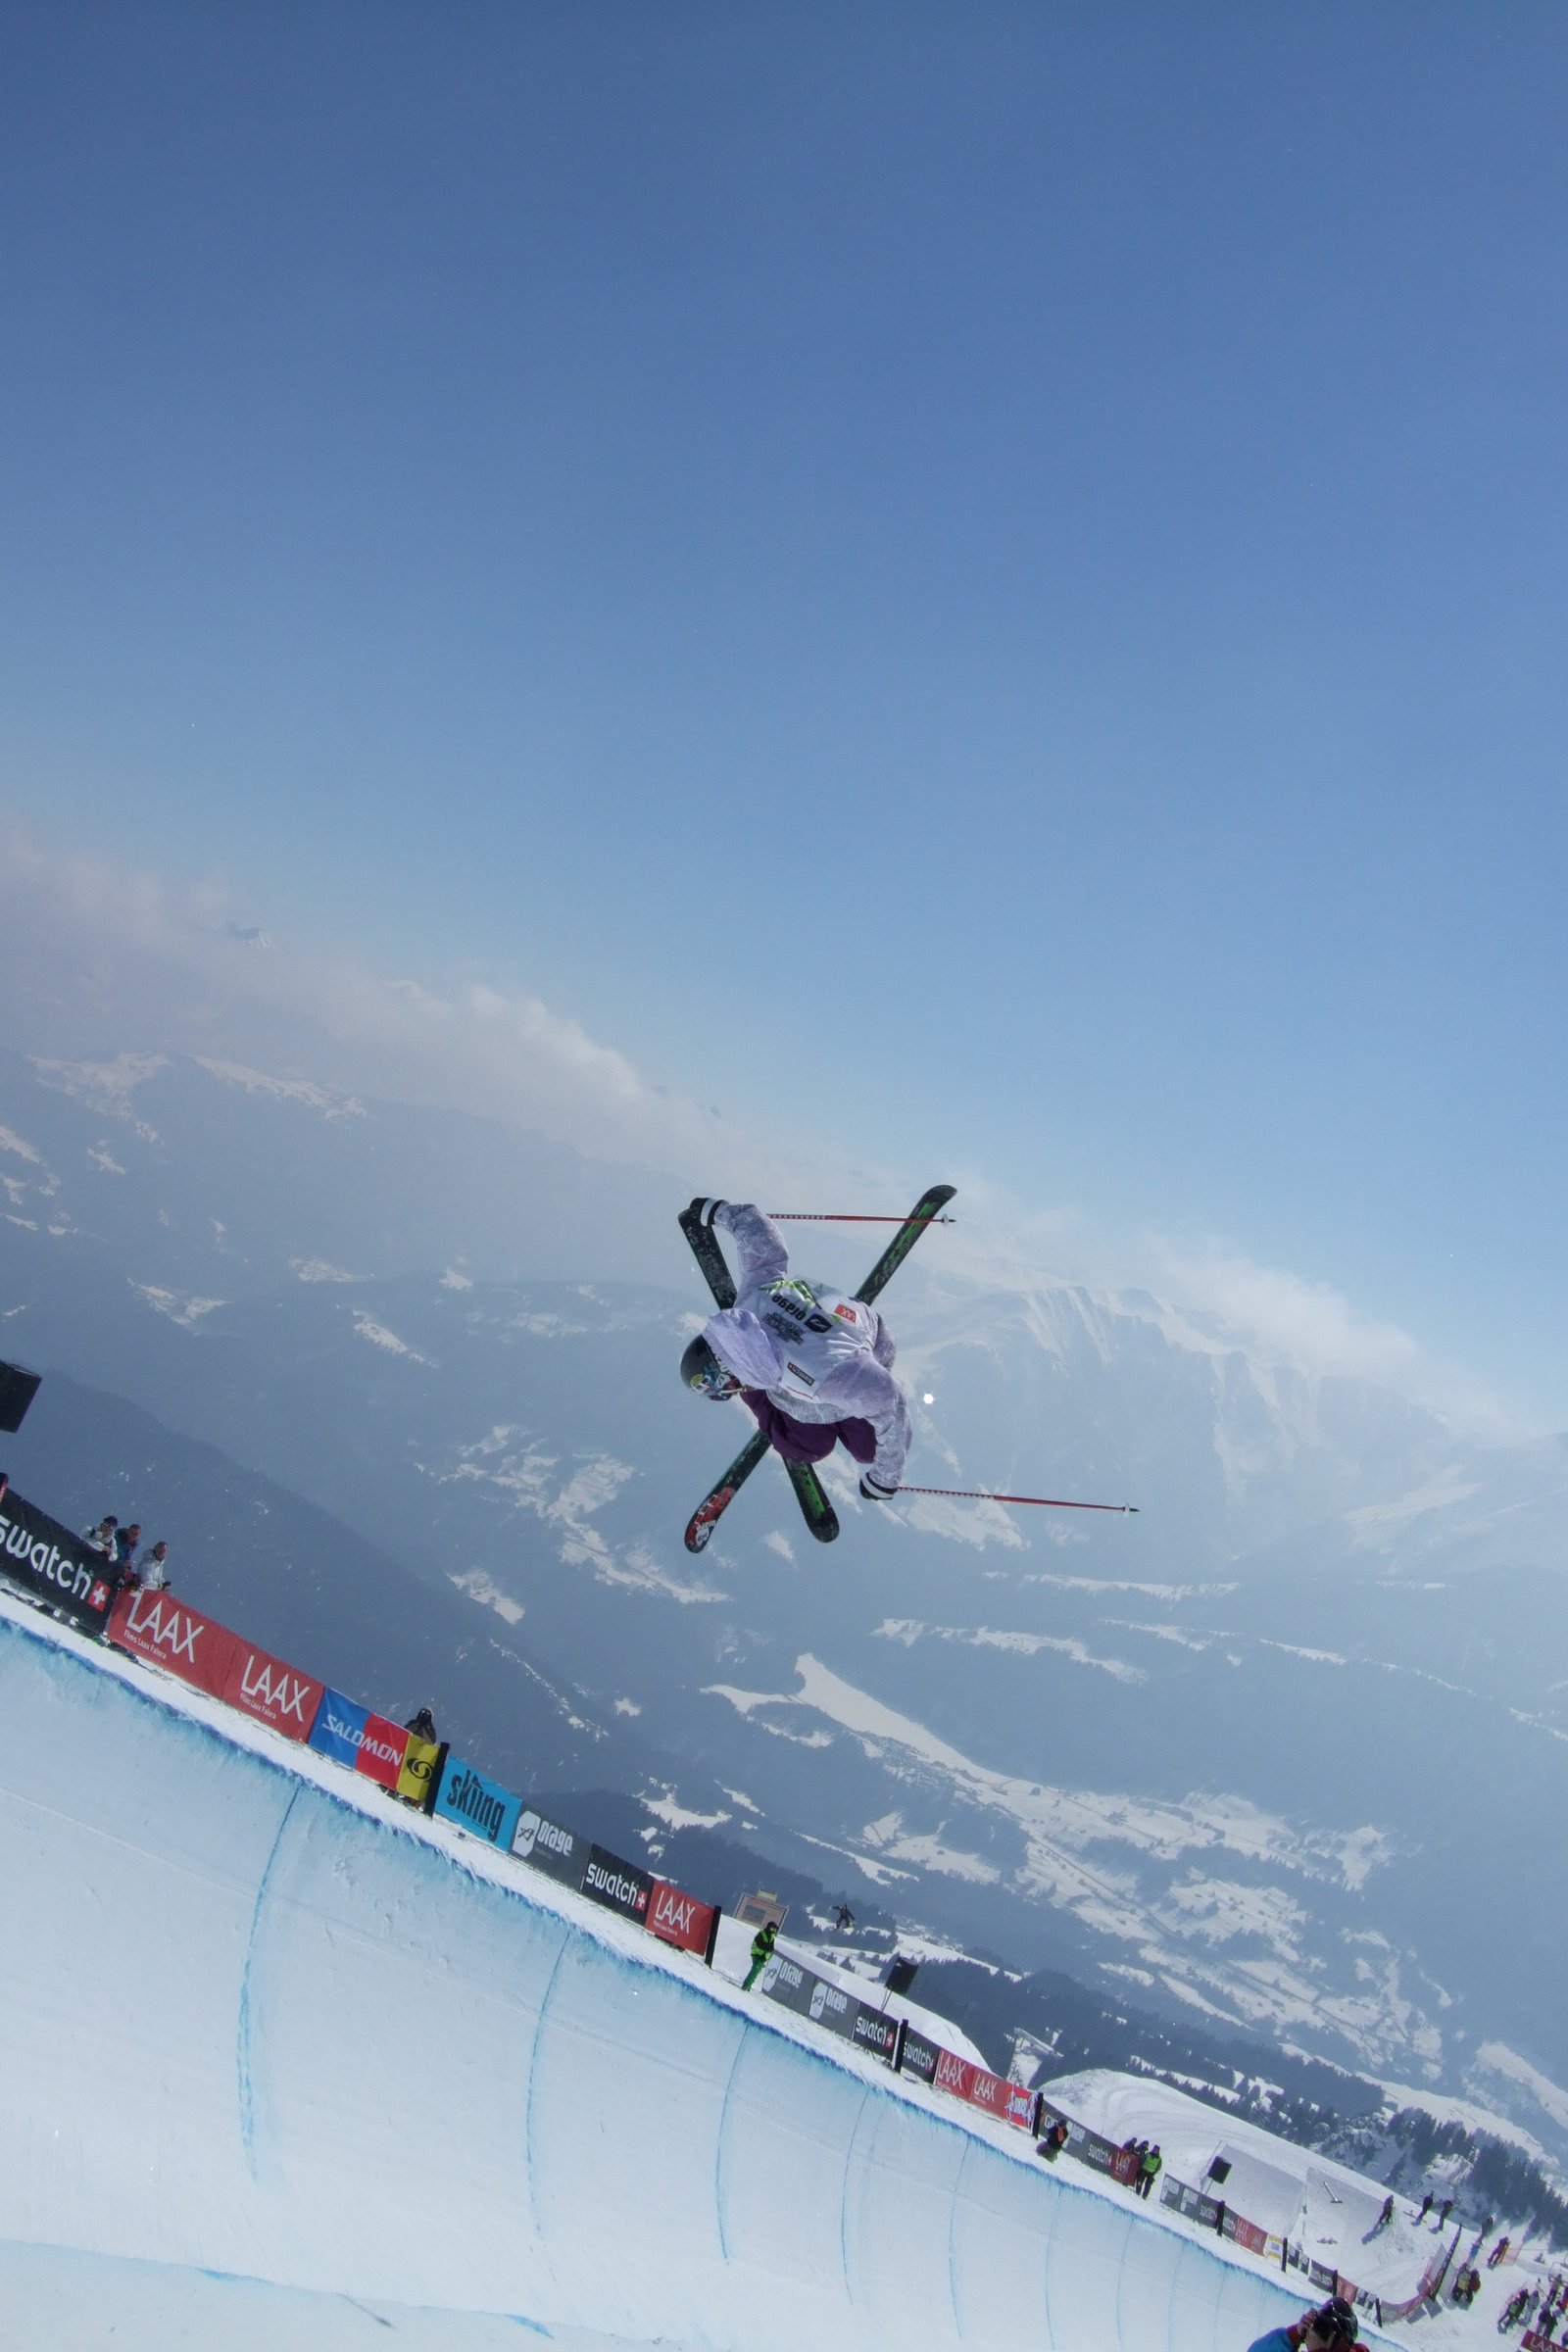 Matt Margetts in the pipe at the European Freeski Open